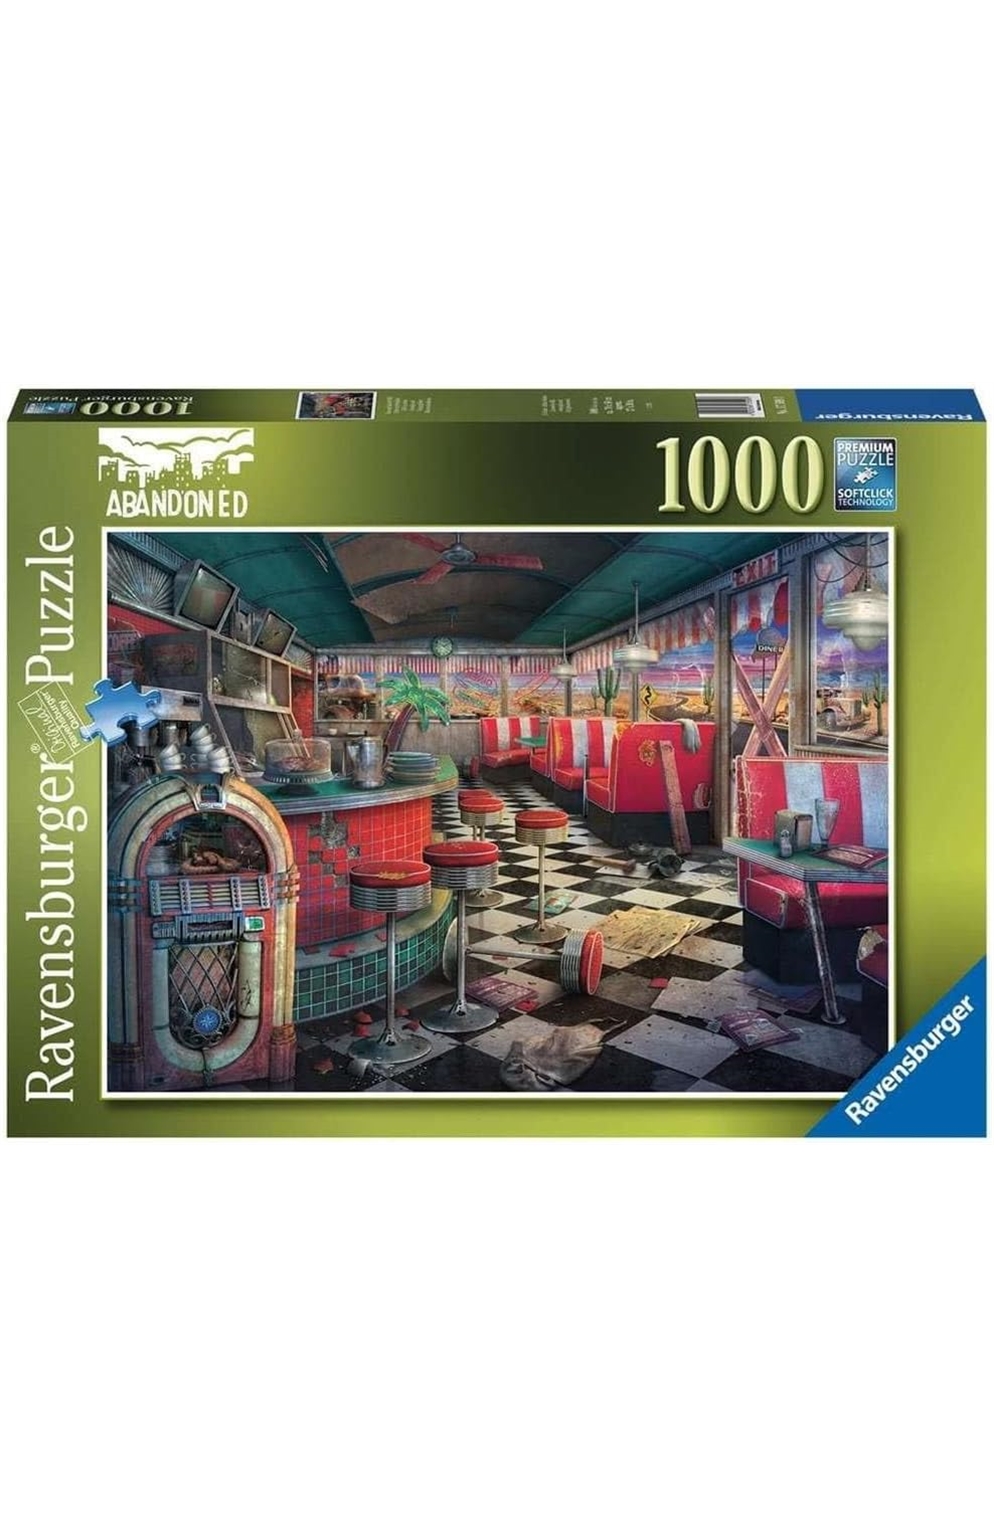 Decaying Diner - Ravensburger 1000 Piece Puzzle